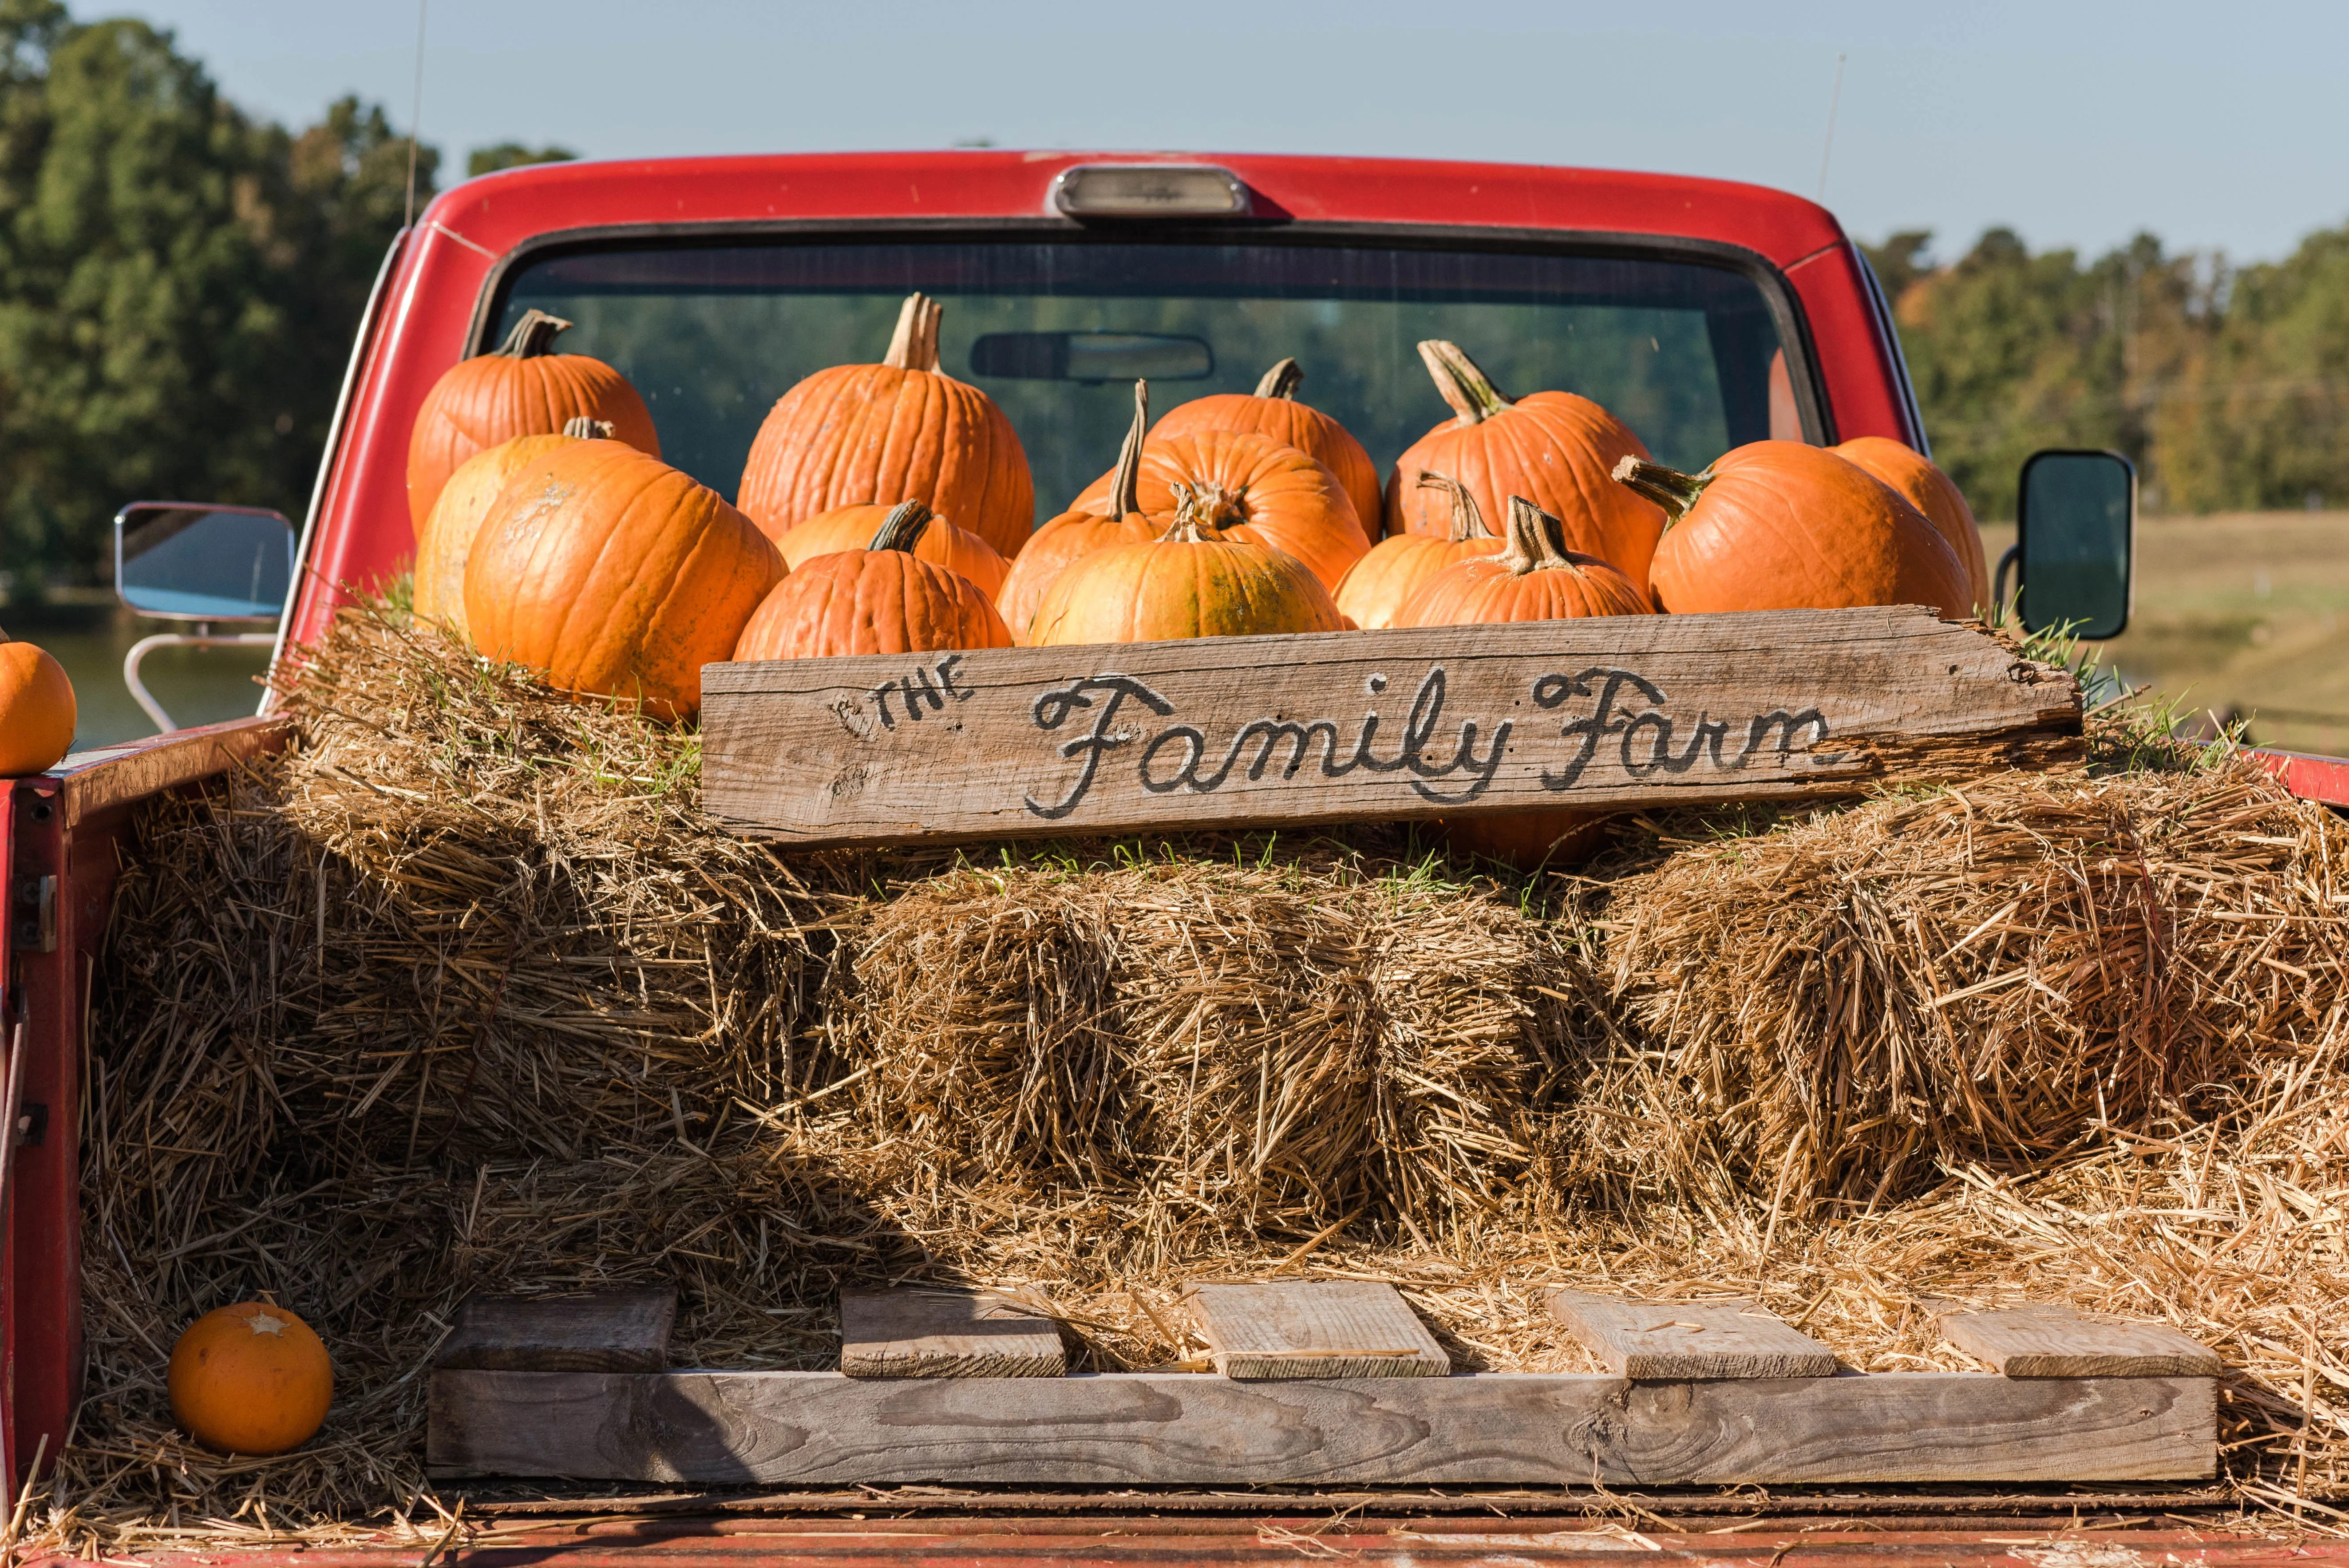 Red Truck with Hay and Pumpkins in the bed with sign that says 